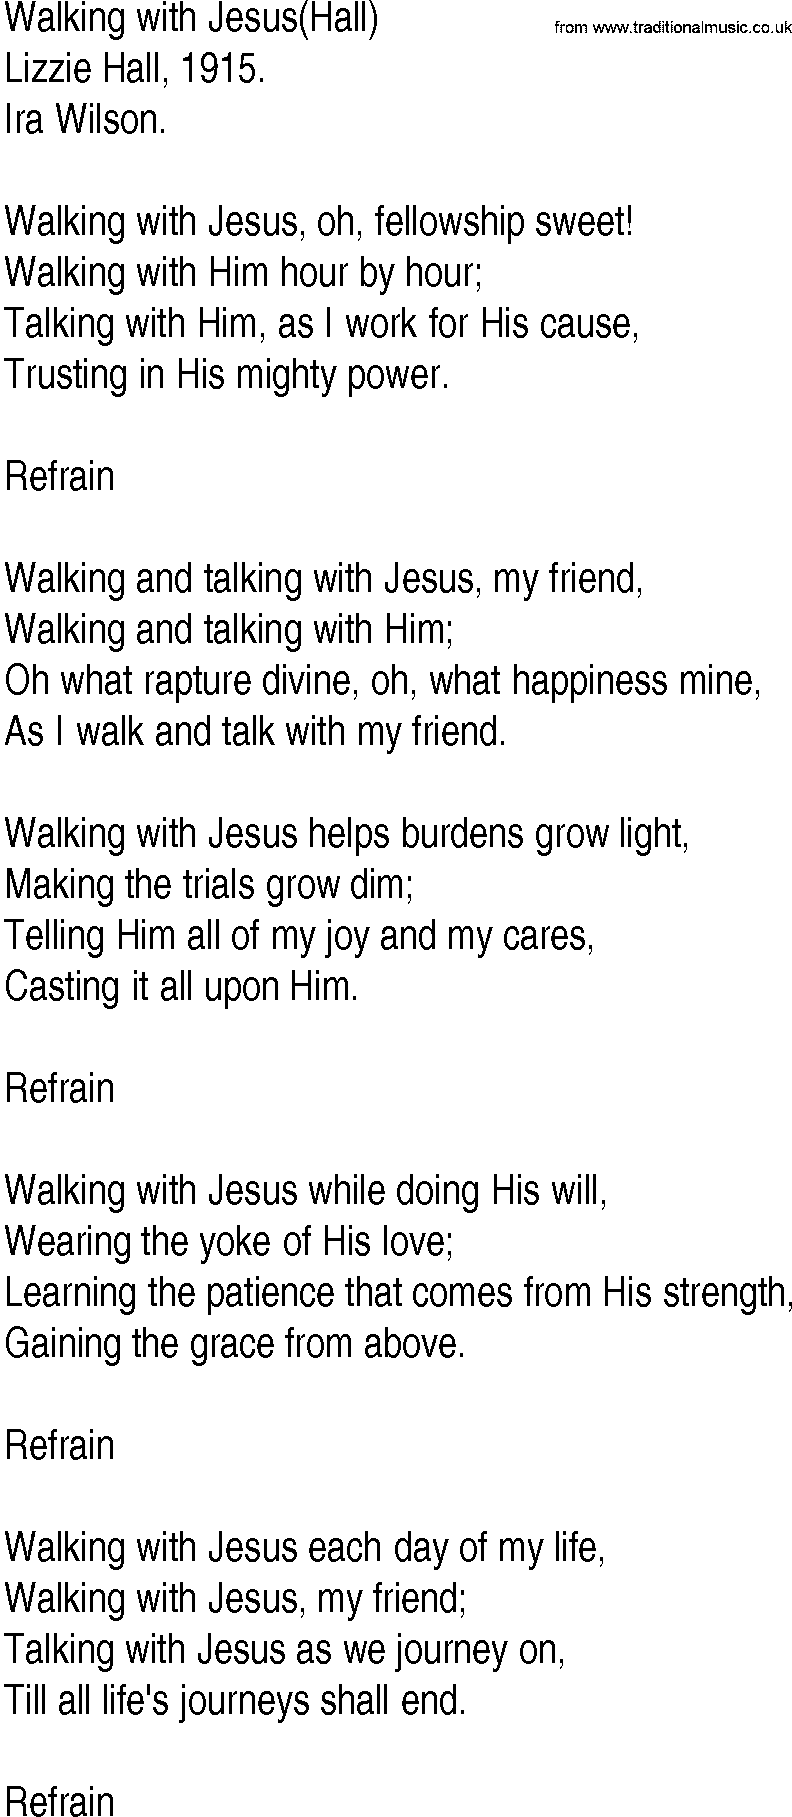 Hymn and Gospel Song: Walking with Jesus(Hall) by Lizzie Hall lyrics